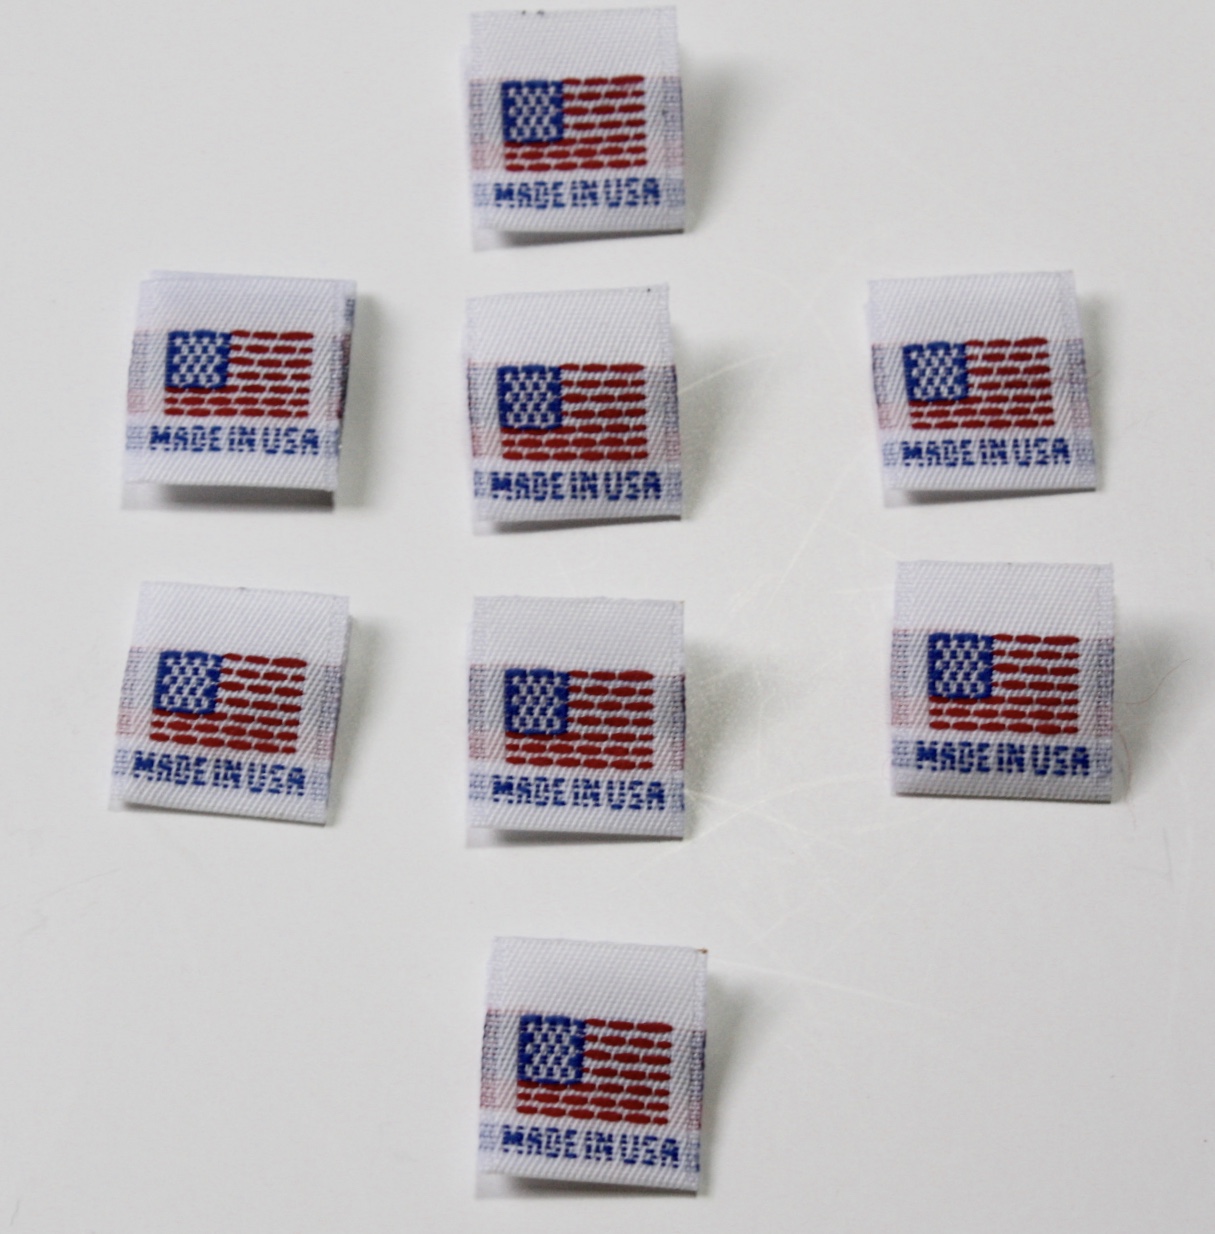 Made in USA Tags (1000)